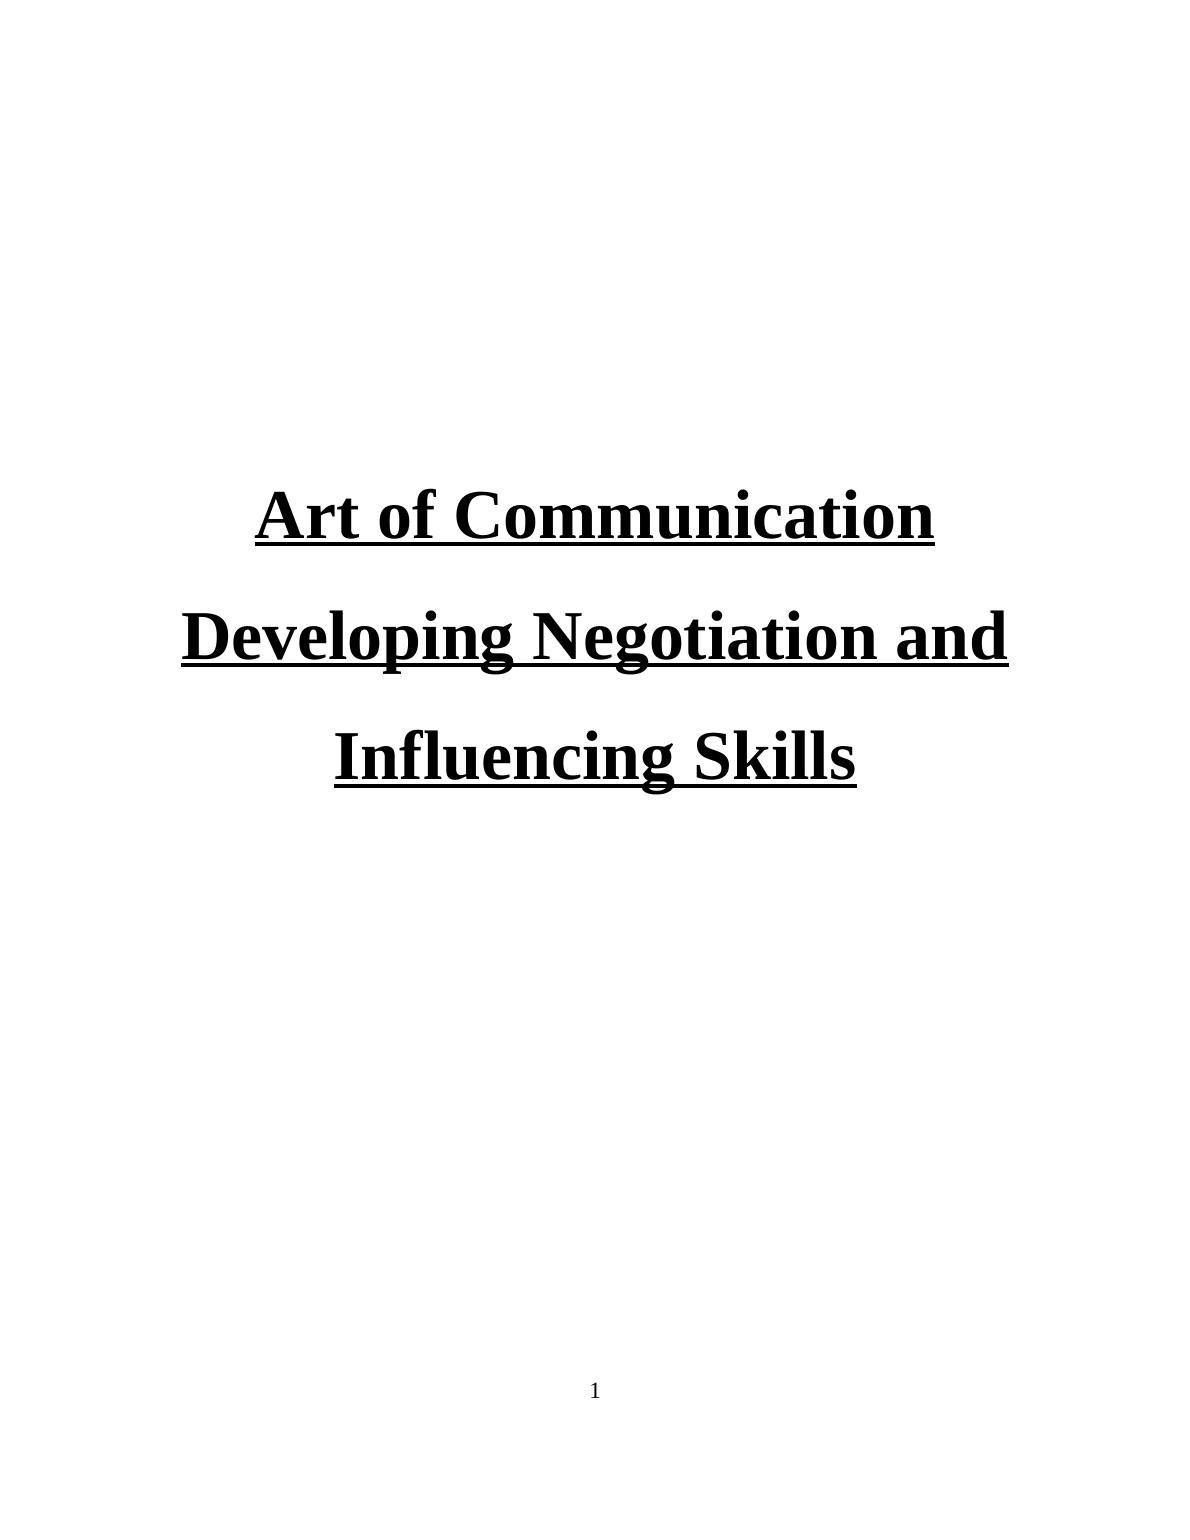 Art of Communication: Developing Negotiation and Influencing Skills_1